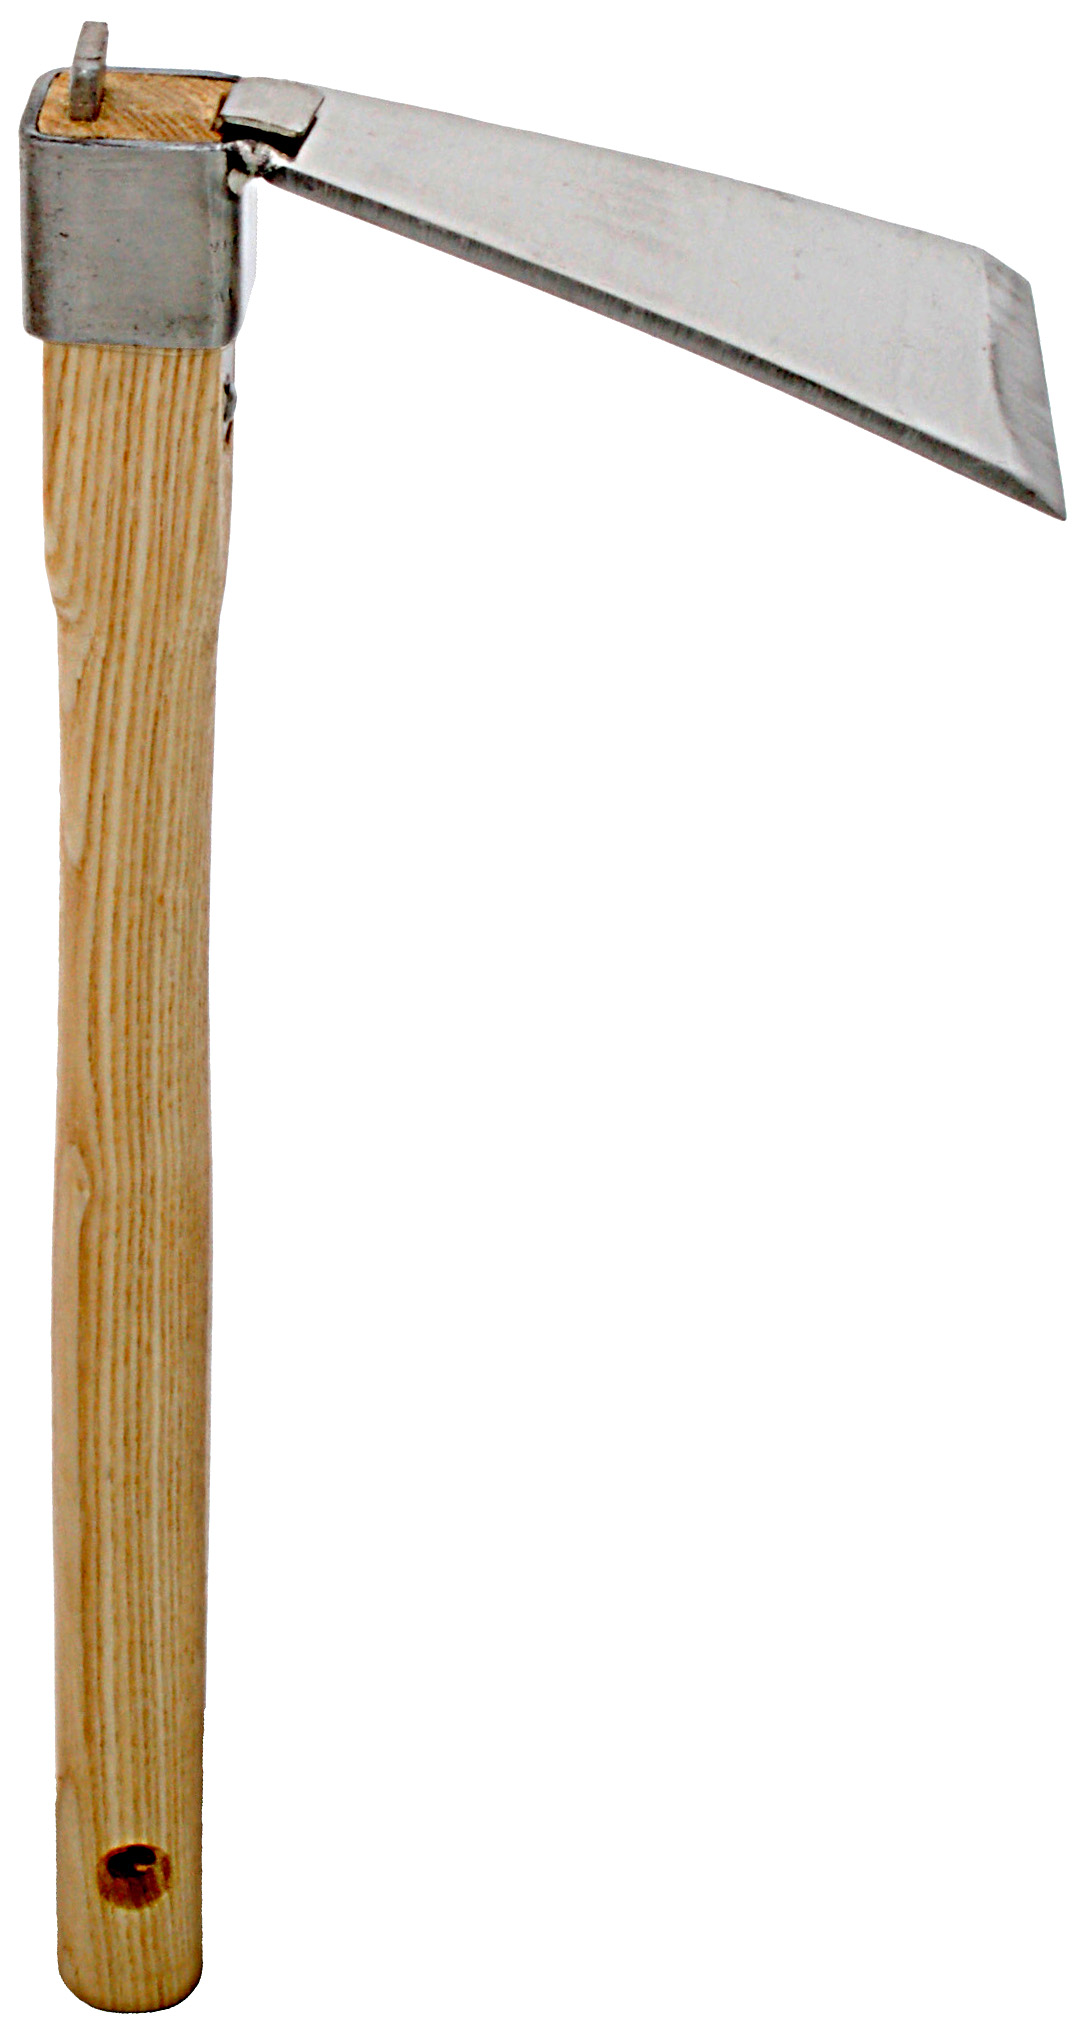 Zenport Garden Hoe J6-02 Hoe 5-Inch by 3.25-Inch Stainless Steel Blade Head - Click Image to Close